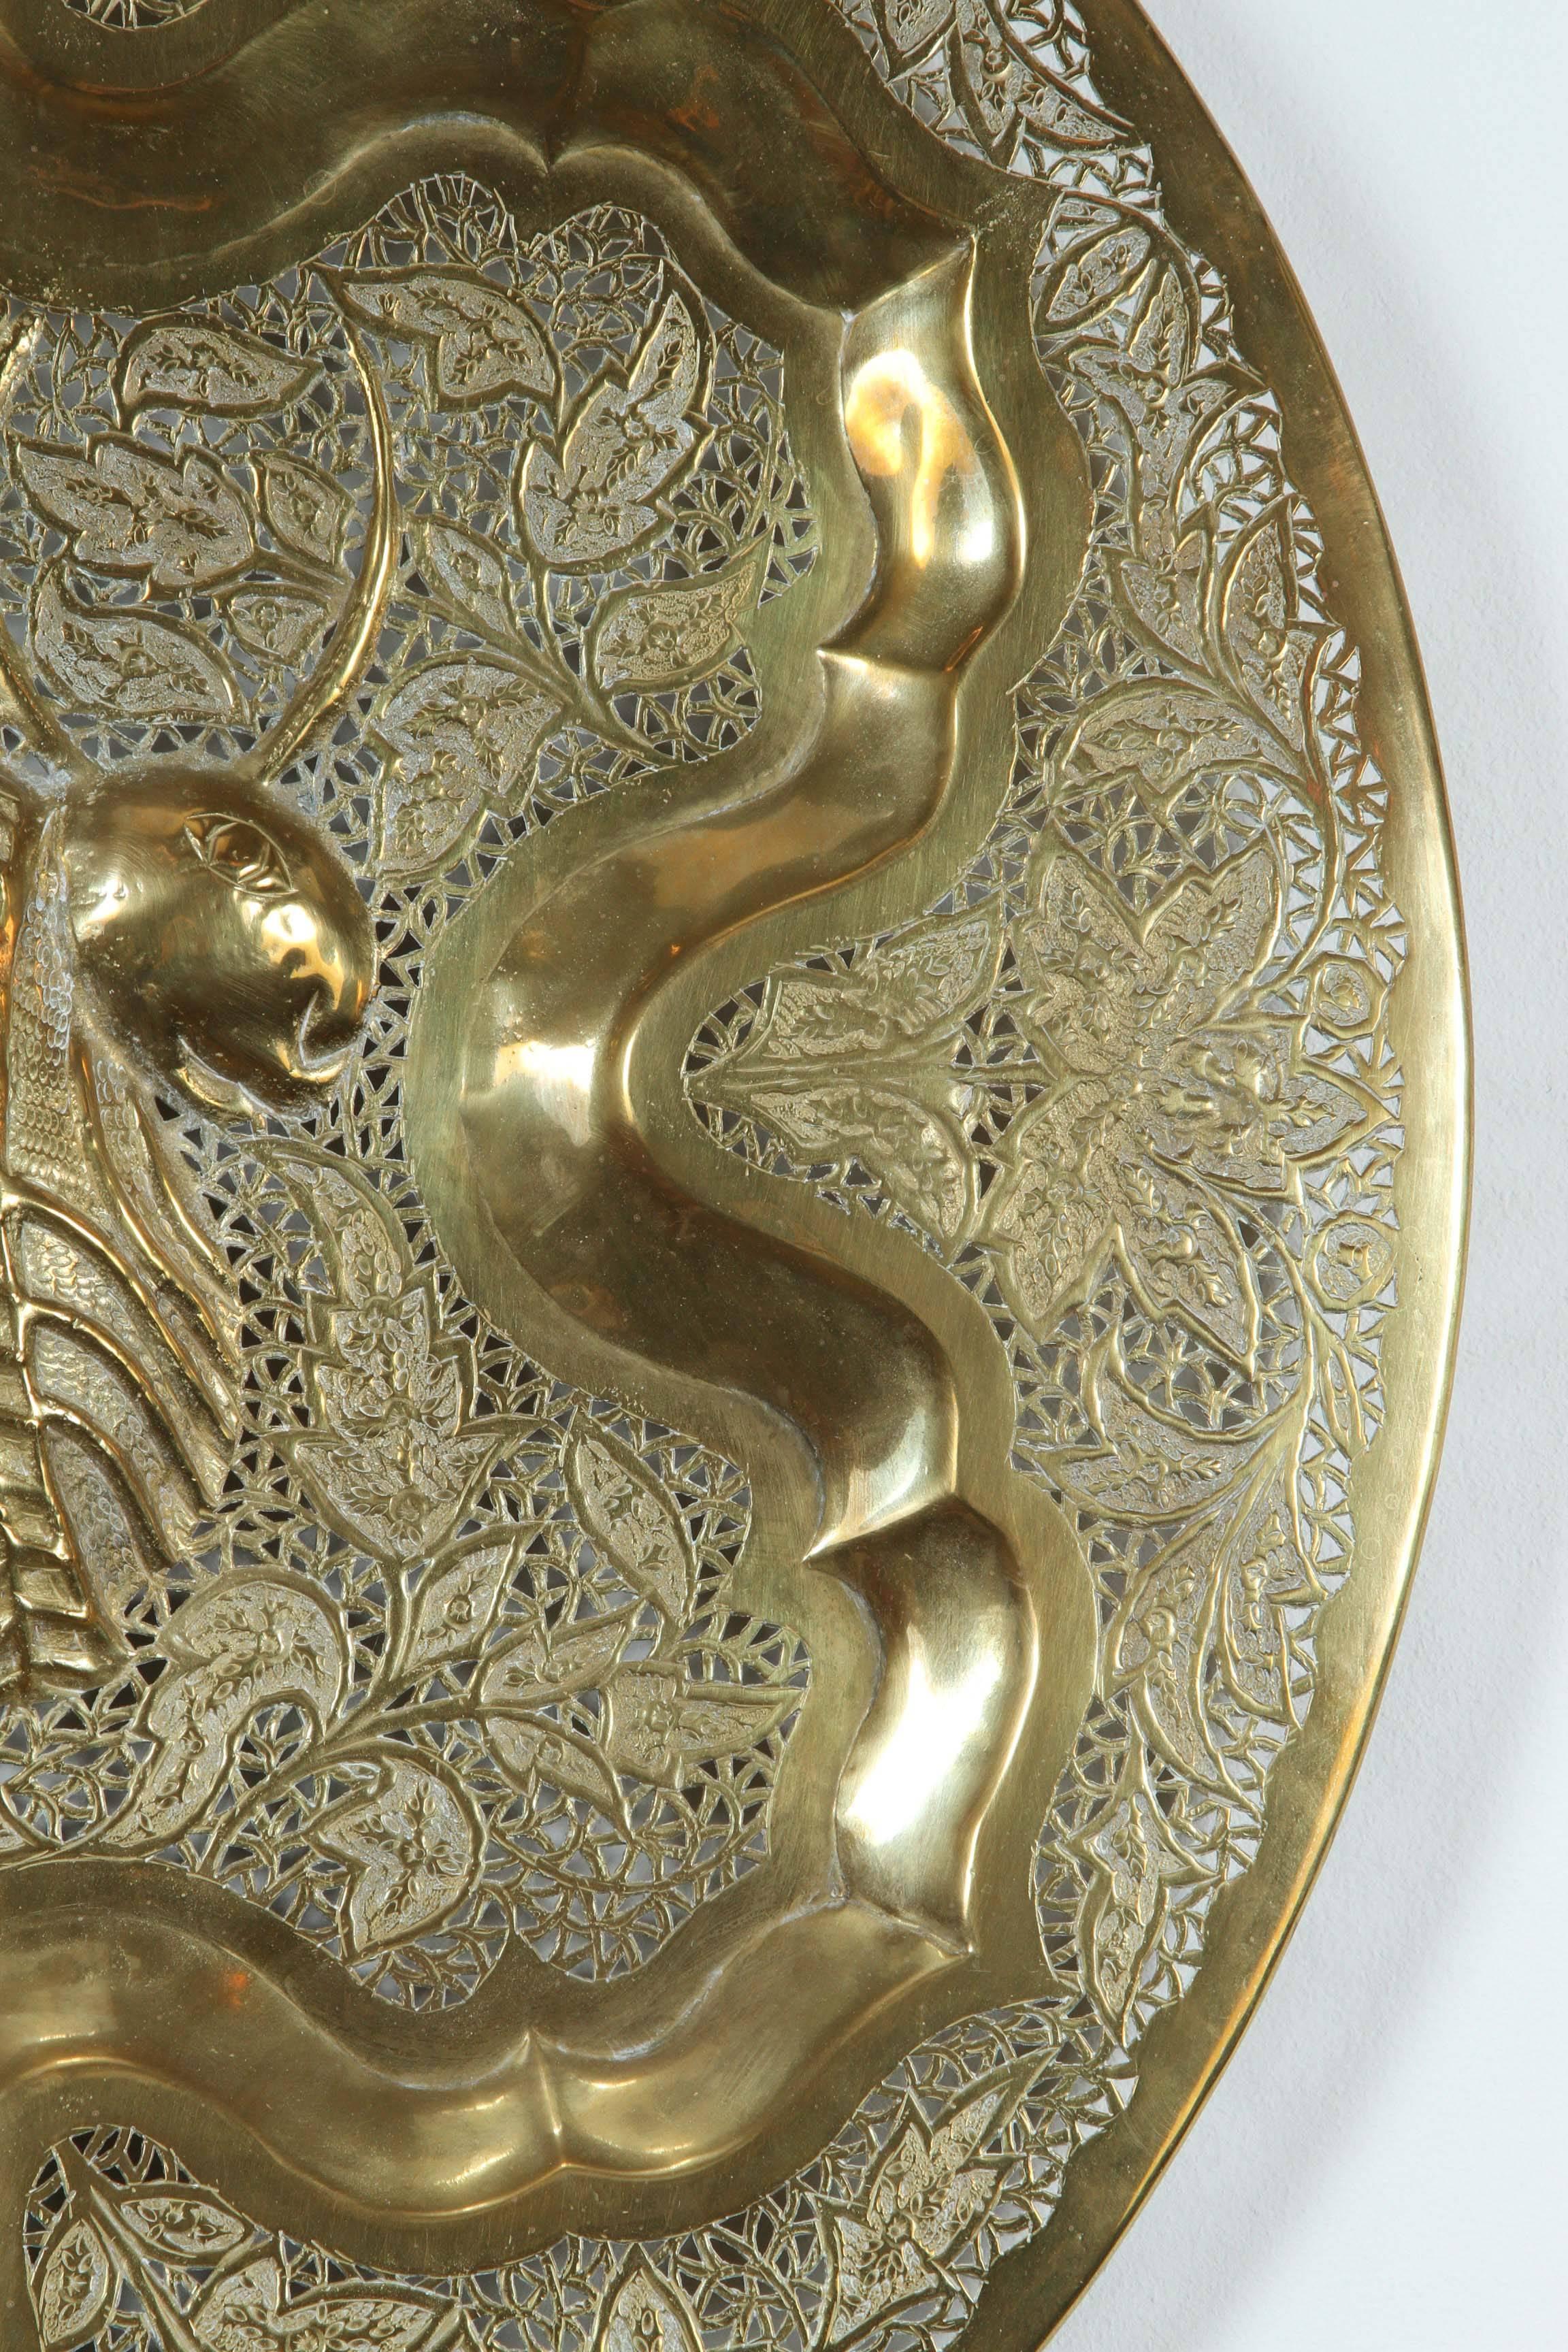 Anglo Raj hanging polished brass tray.
Finely hand-chased, hand-cut and hand-hammered with floral repousse designs.
The middle of the tray is a large ceremonial figure of a cow hammered.
Great brass decorative art object.
 